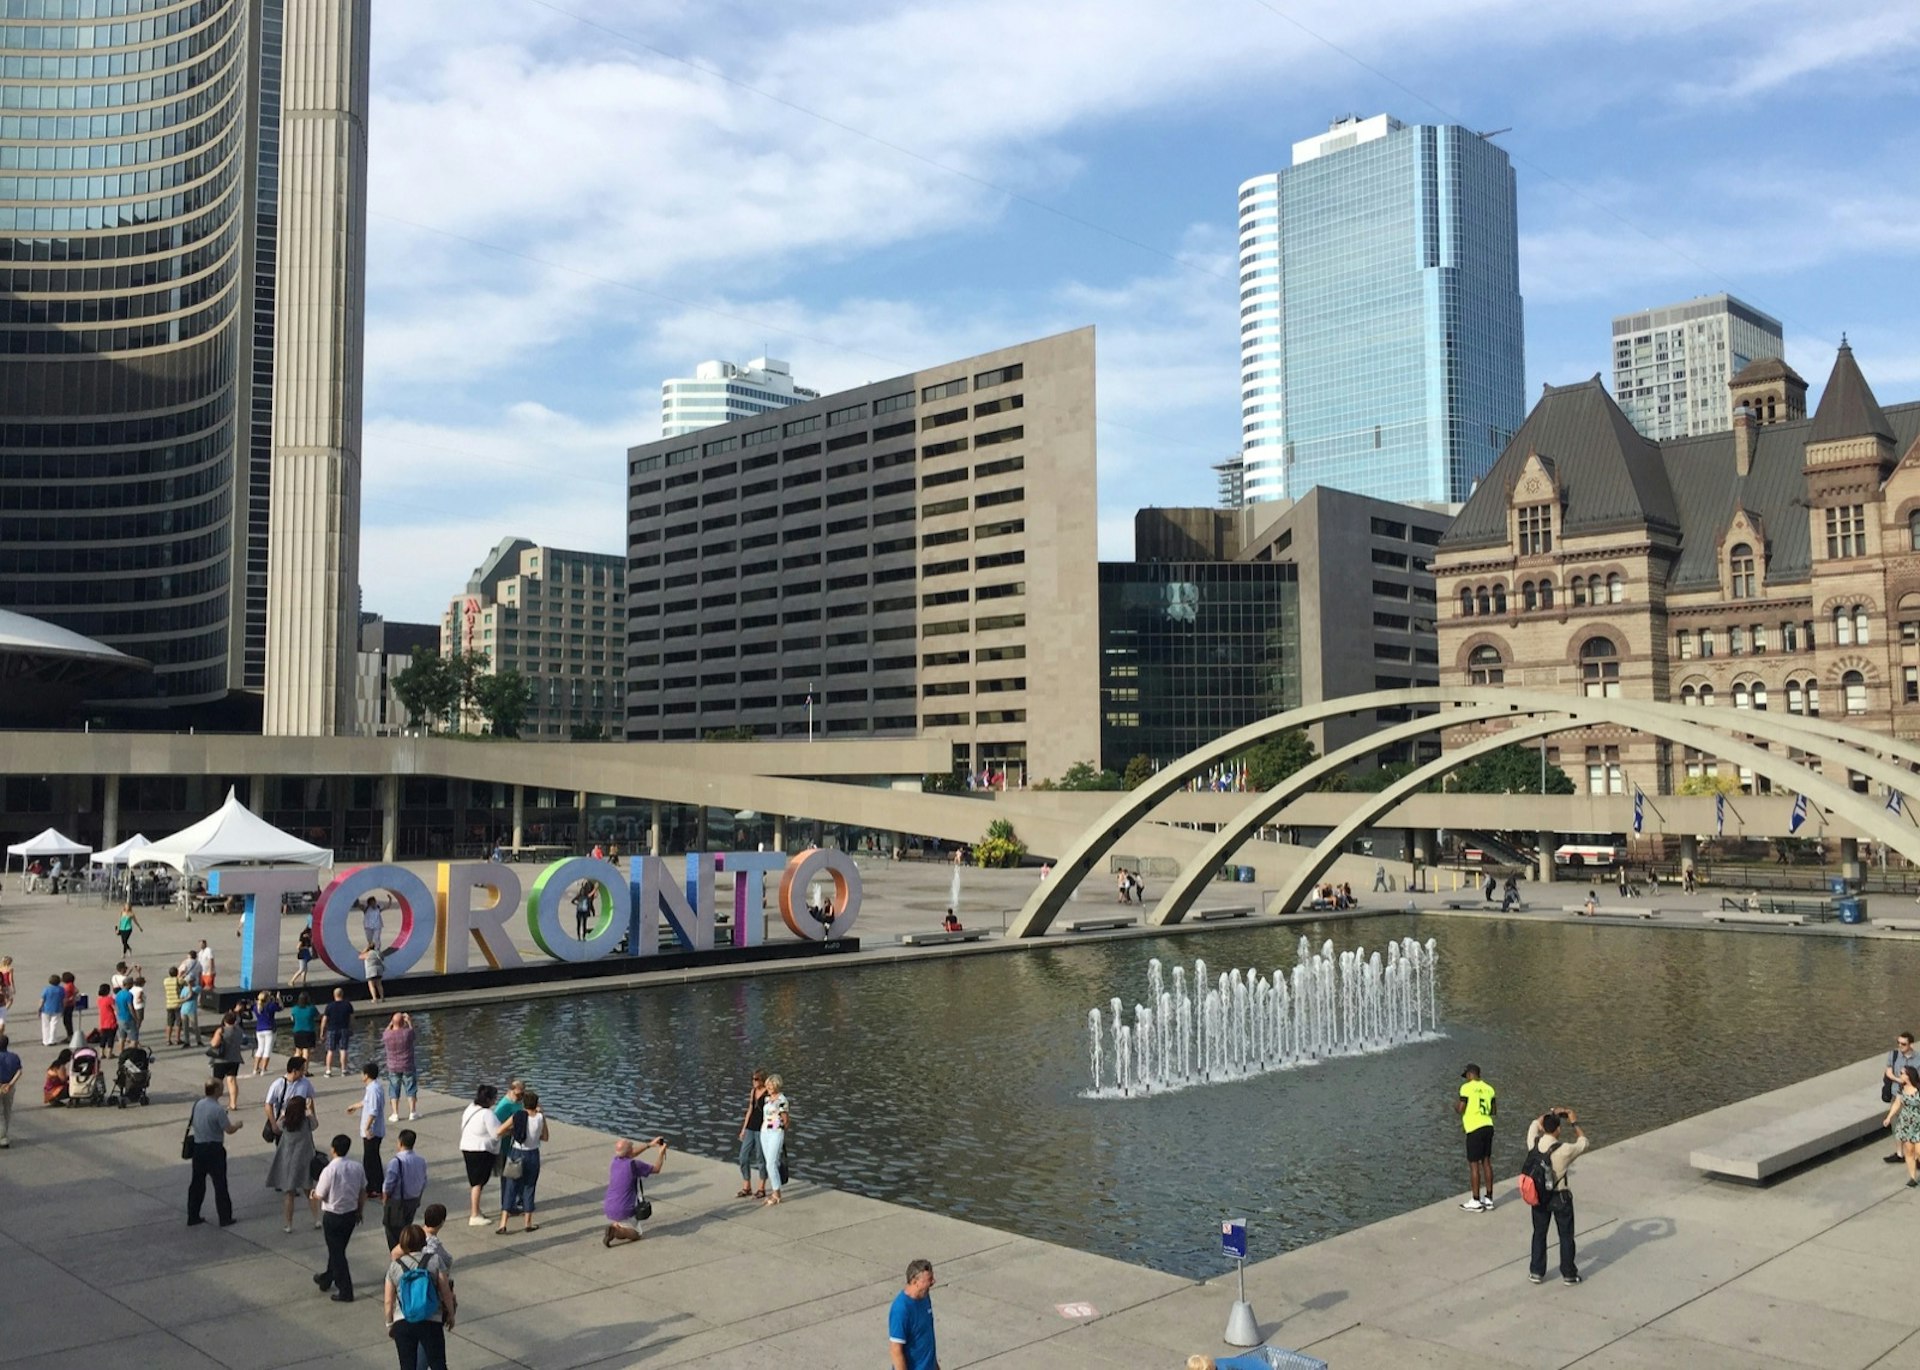 People interact around a large fountain, with giant rainbow colored letters spelling out Toronto nearby